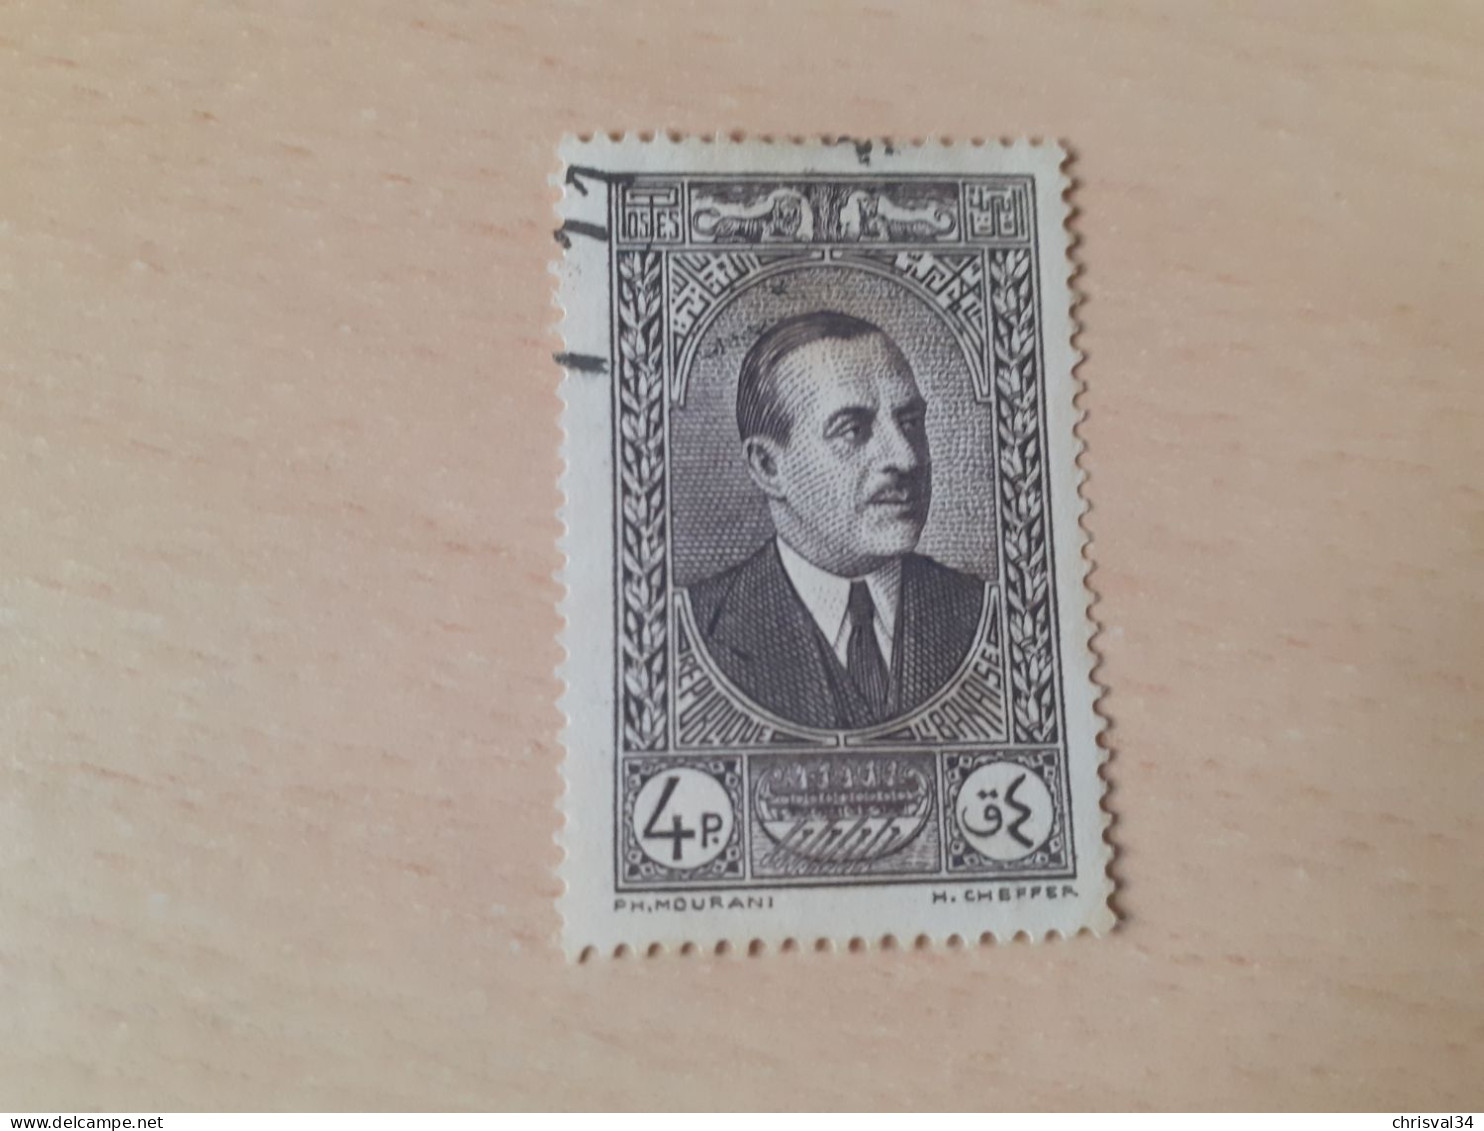 TIMBRE   GRAND  LIBAN       N  153      COTE  0,50  EUROS    OBLITERE - Used Stamps